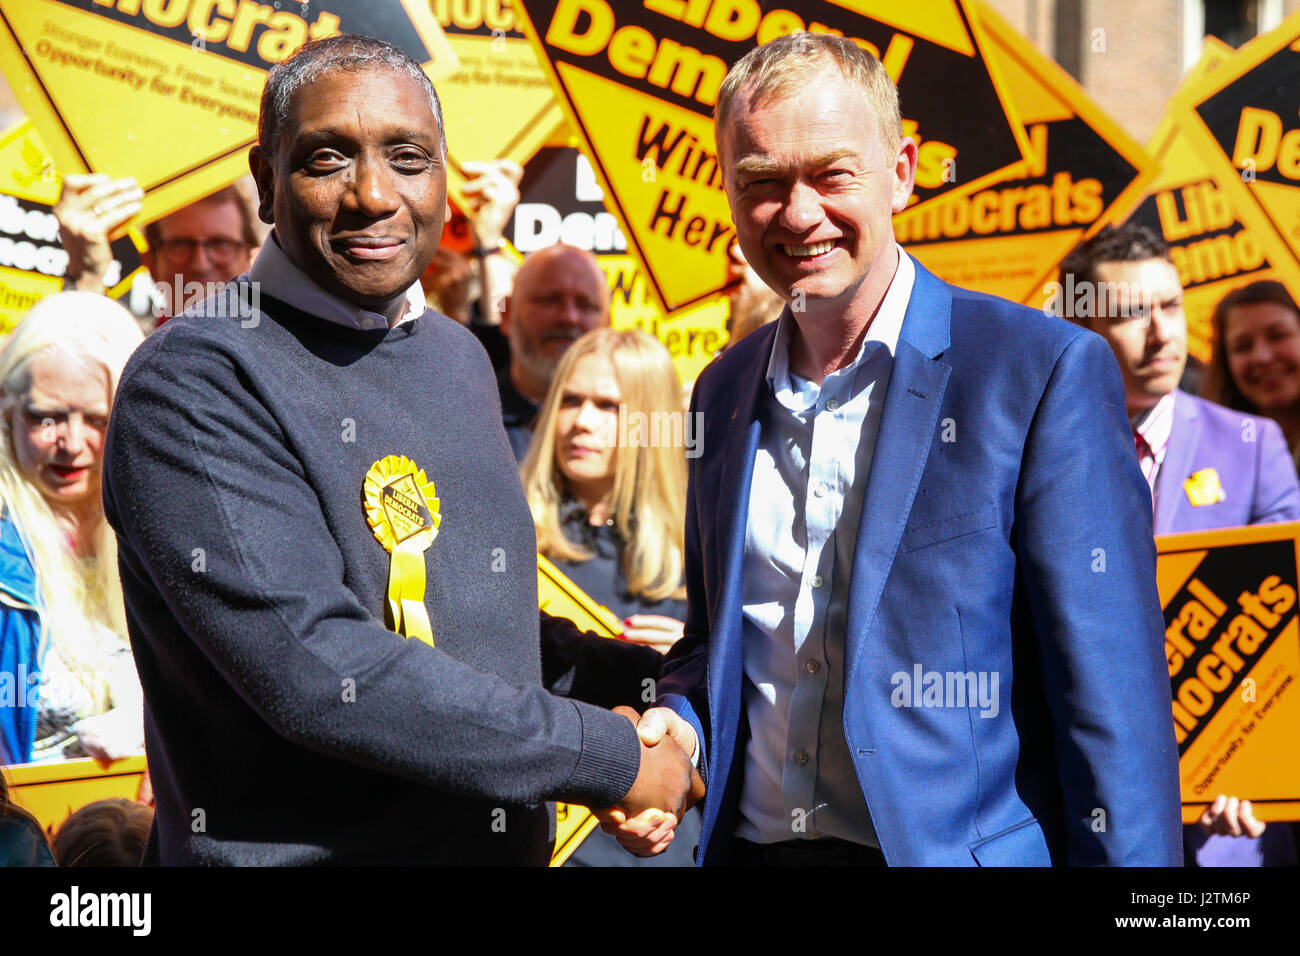 London, UK. 01st May, 2017.Brian Haley candidate for Tottenham with Tim Farron (l to r). Liberal Democrat leader Tim Farron attends an election campaign event in Hornsey Town Hall on day one of his battle bus tour and is greeted by Dawn Barnes Lib Dem candidate for Hornsey and Wood Green.. Credit: Dinendra Haria/Alamy Live News Credit: Dinendra Haria/Alamy Live News Credit: Dinendra Haria/Alamy Live News Stock Photo